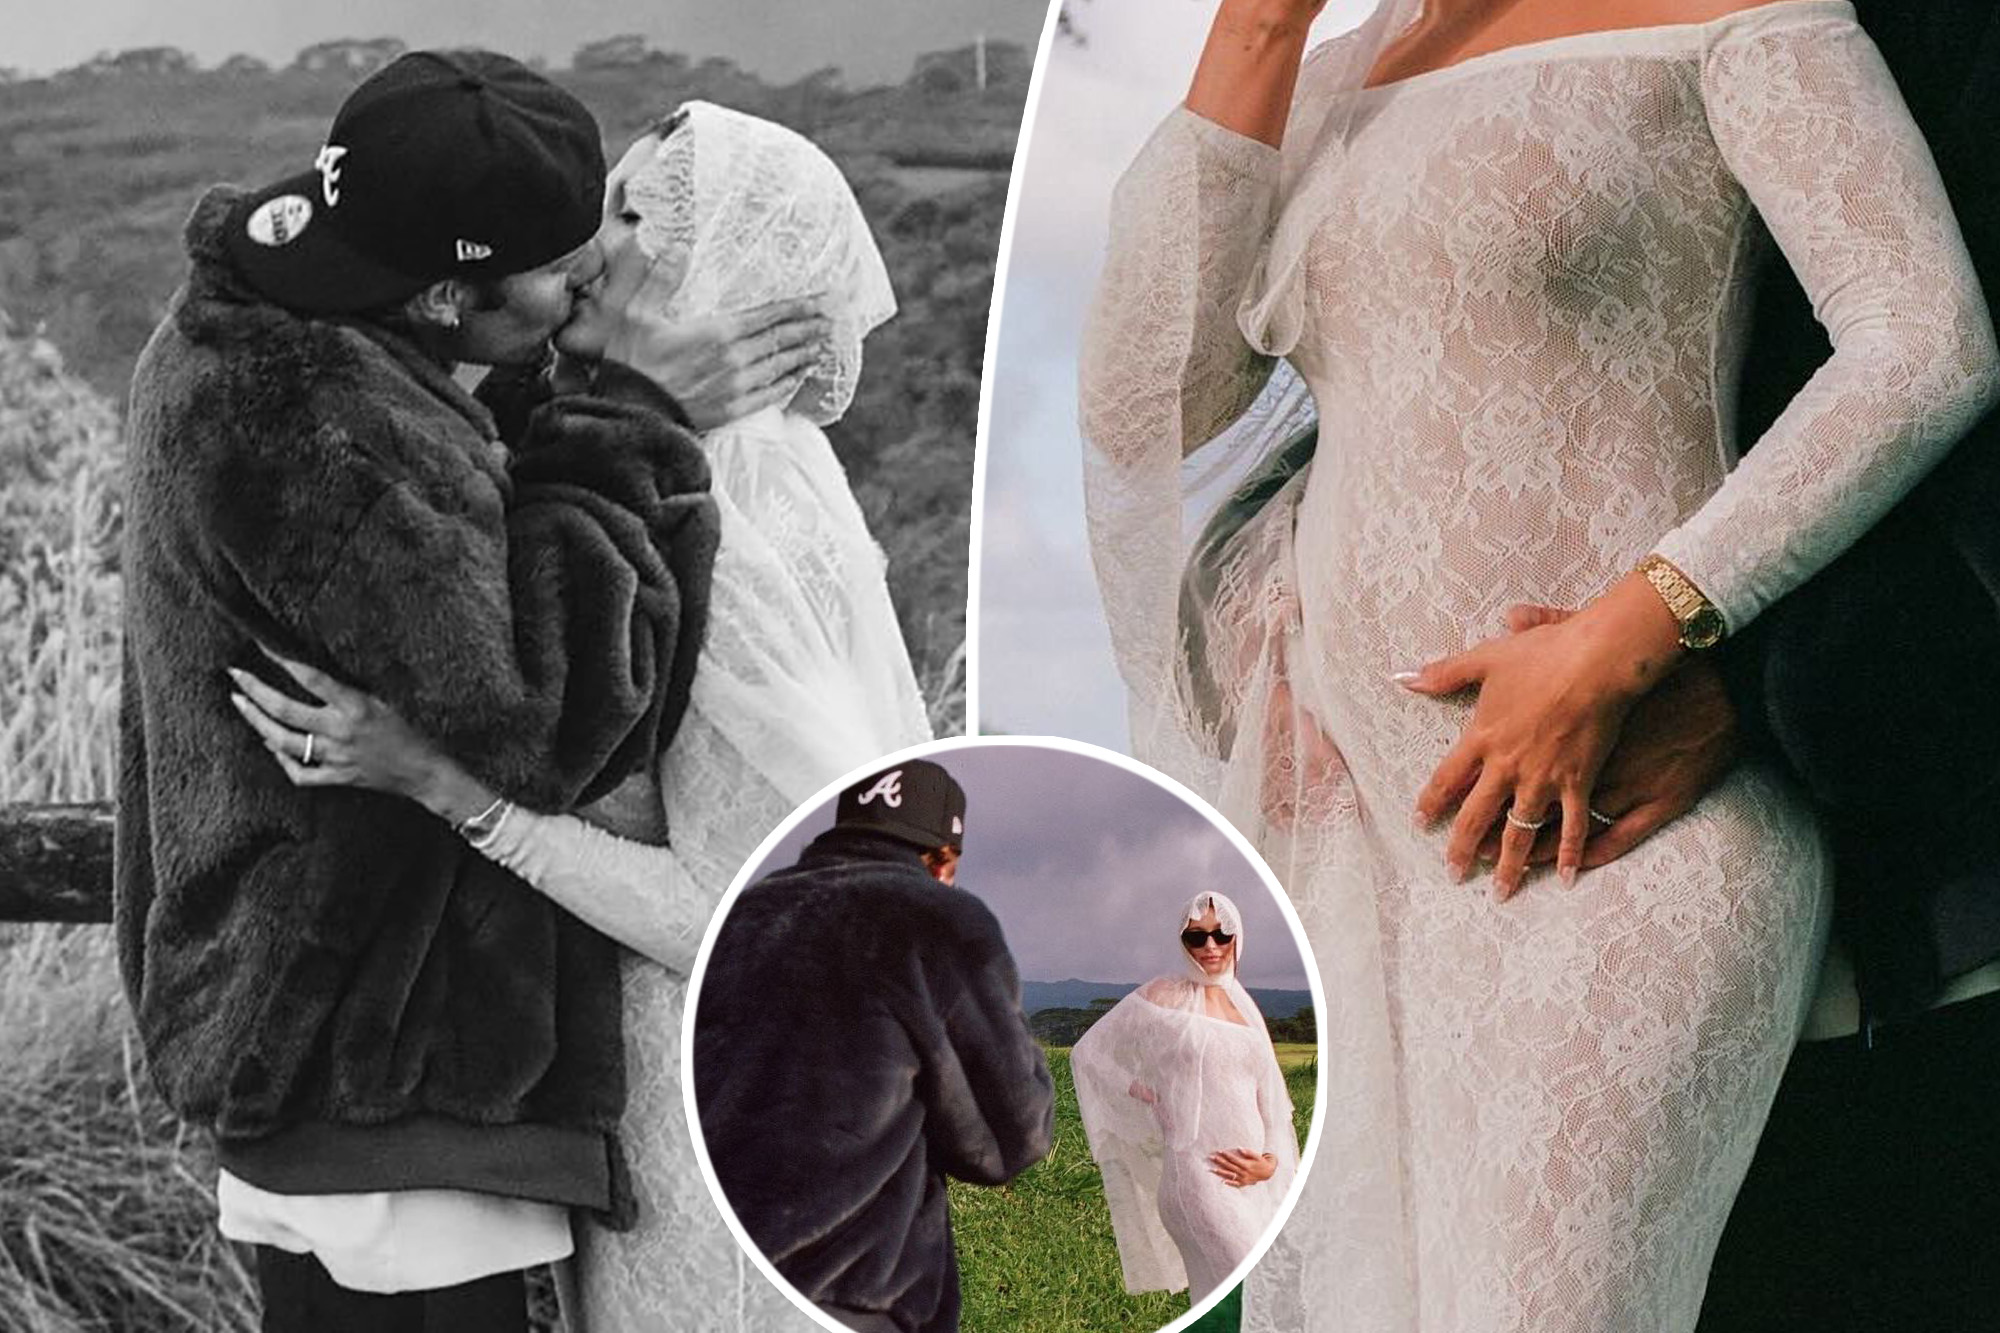 Hailey Bieber and Justin Bieber Expecting First Child